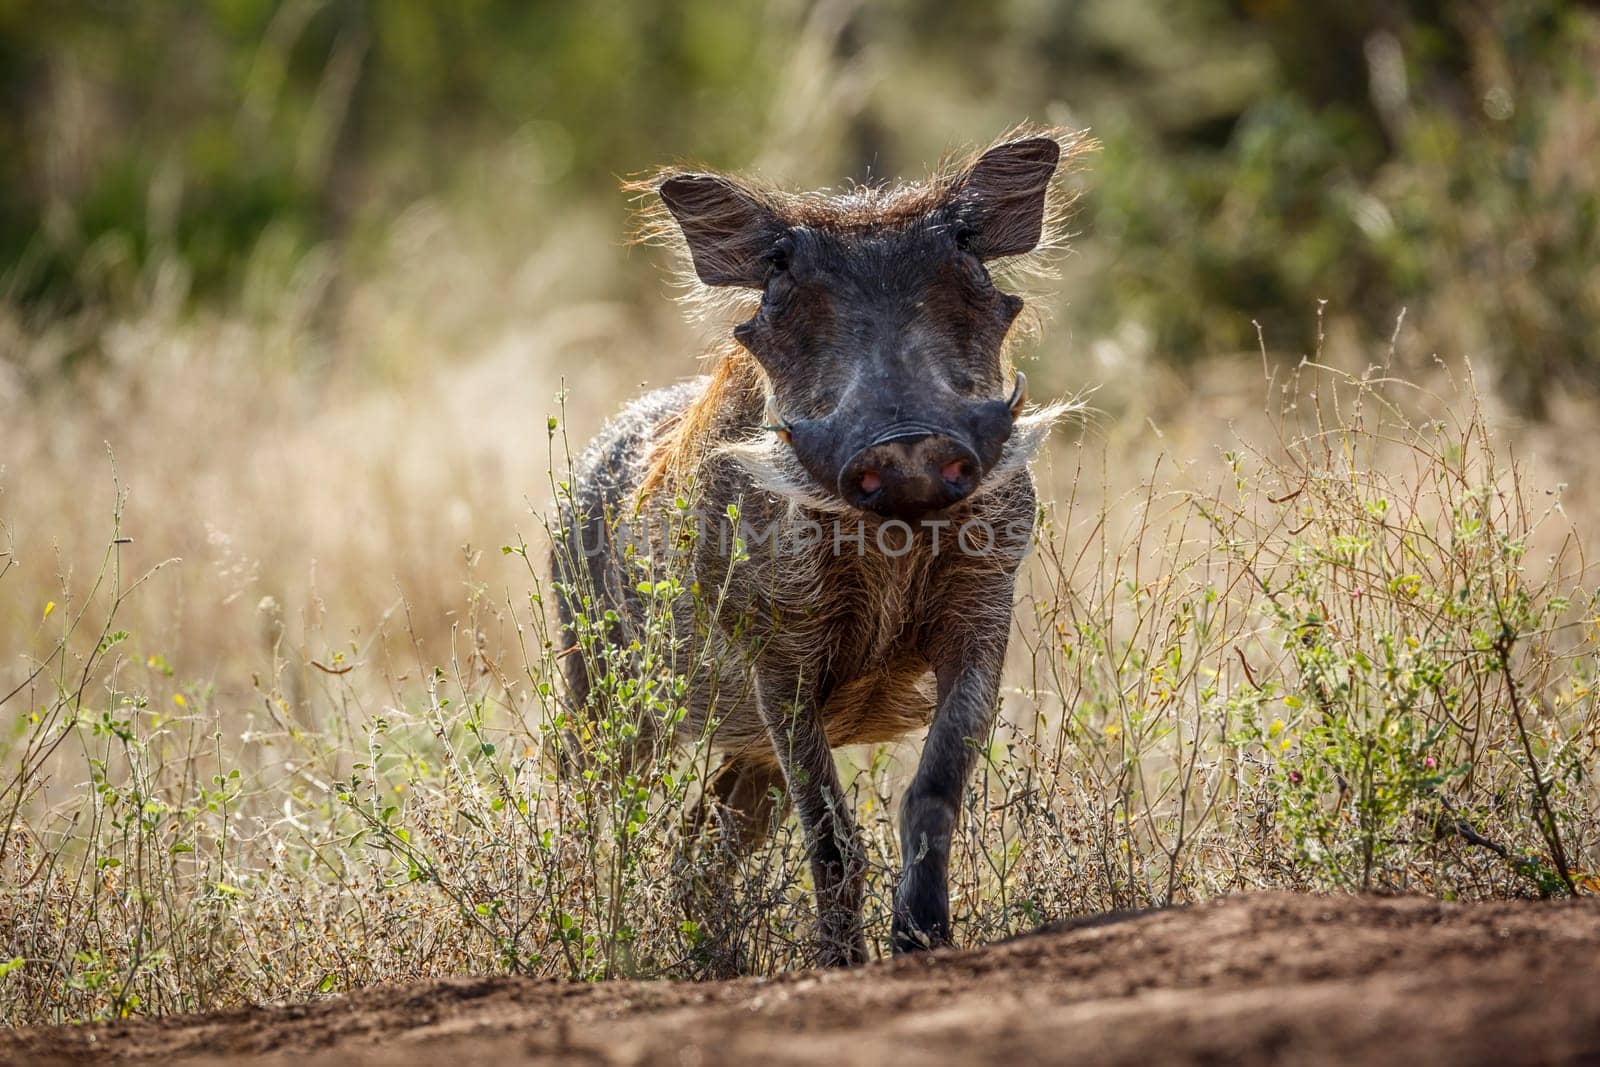 Common warthog front view looking at camera in Kruger National park, South Africa ; Specie Phacochoerus africanus family of Suidae